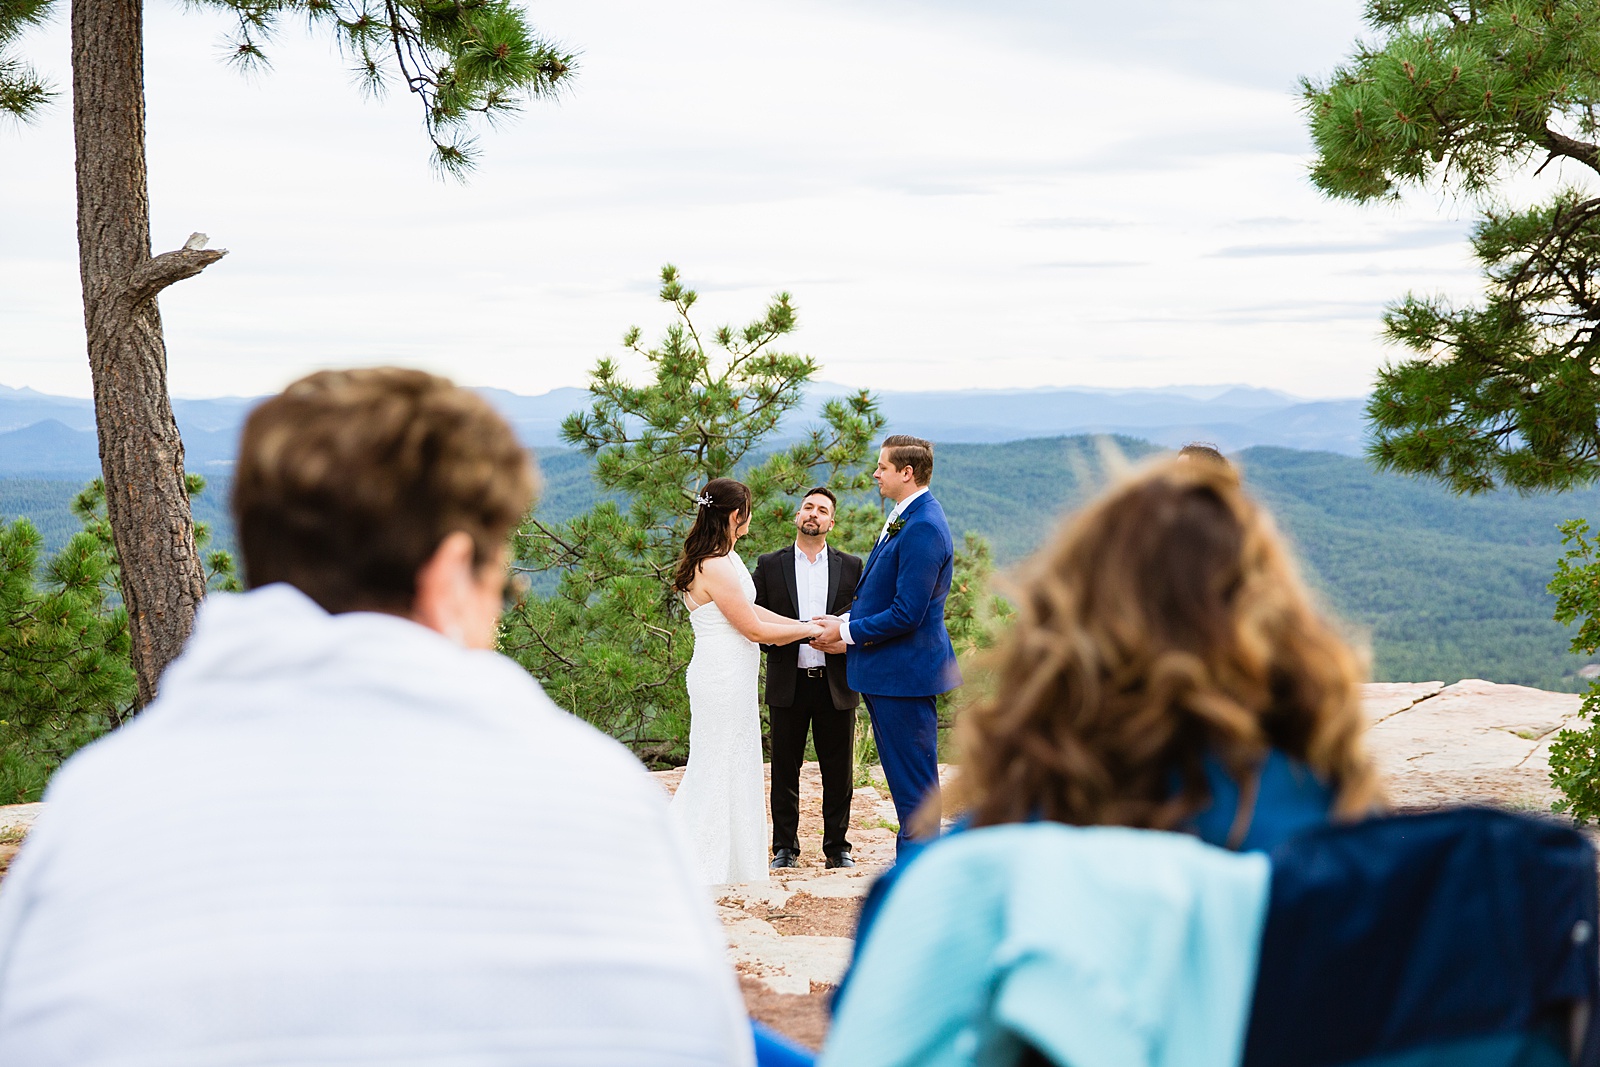 Bride & Groom exchange vows during their wedding ceremony at Mogollon Rim by Arizona elopement photographer Juniper and Co Photography.